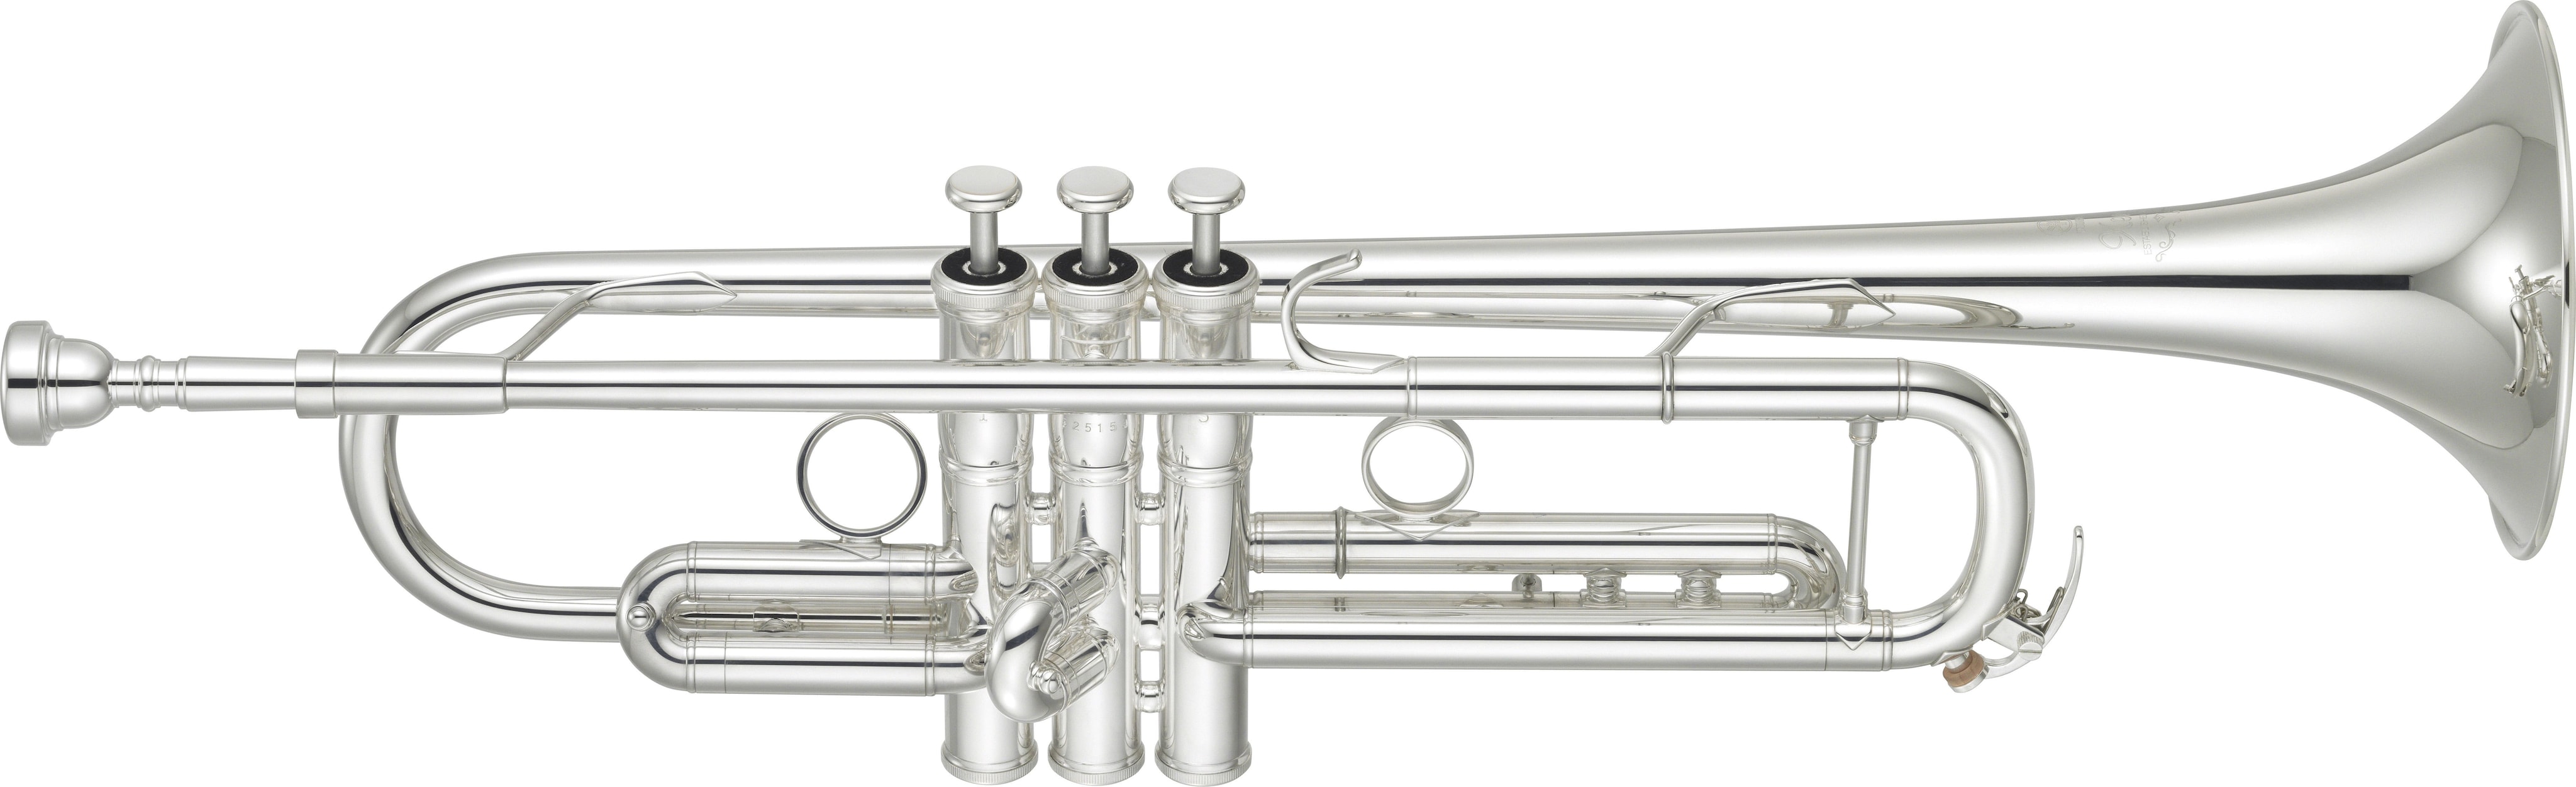 YTR-8345RS - Overview - Bb Trumpets - Trumpets - Brass & Woodwinds 